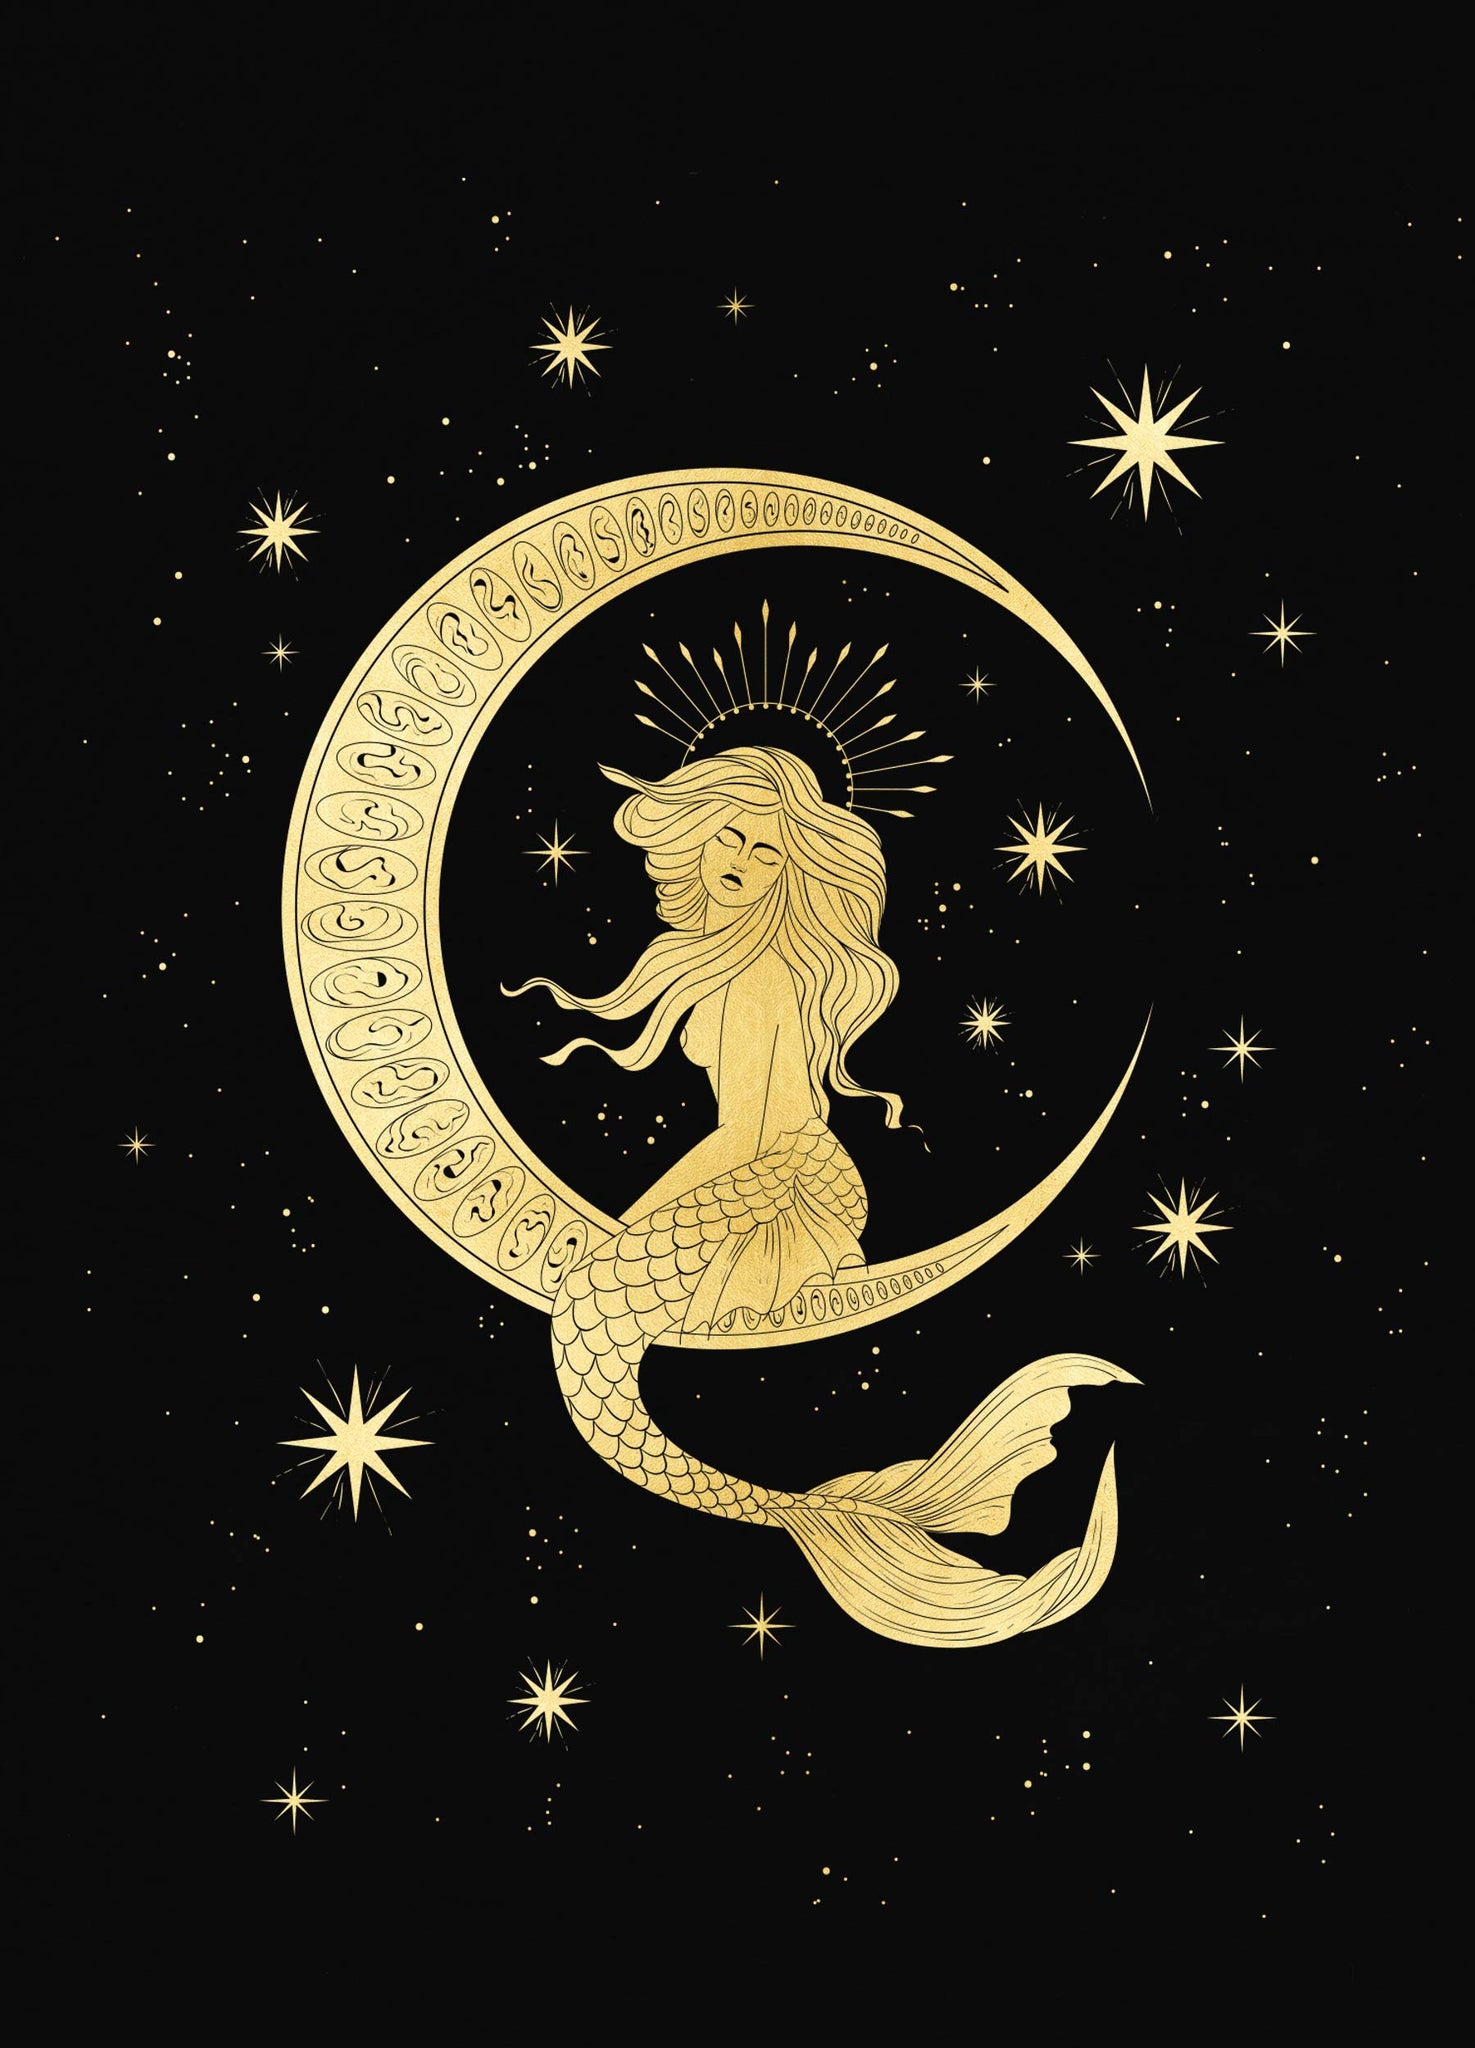 Queen moon mermaid gold foil print on black paper by Cocorrina & Co Shop and Design Studio